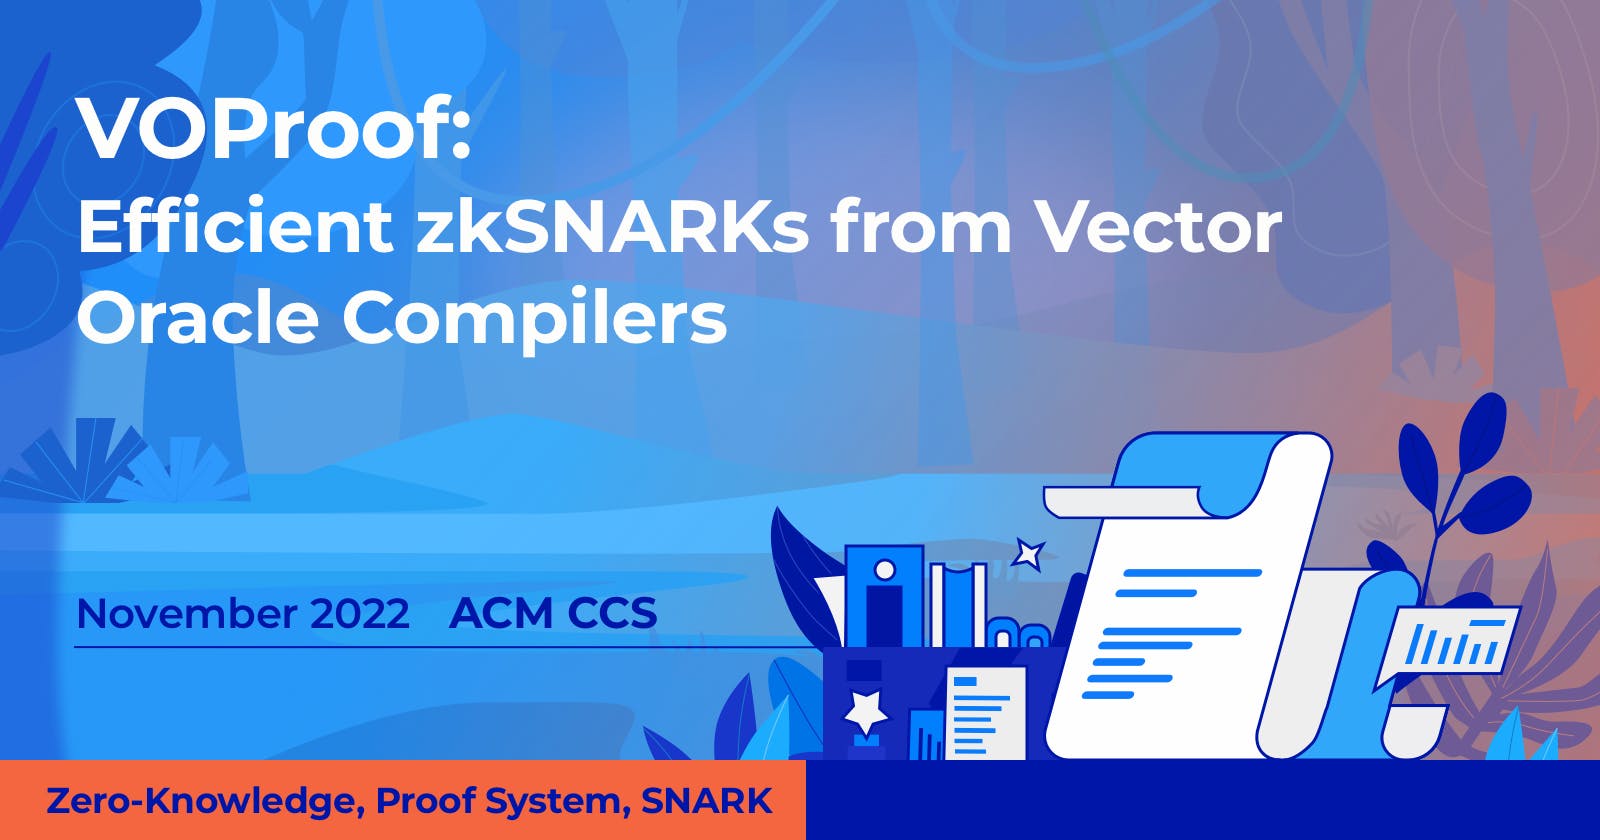 VOProof: Efficient zkSNARKs from Vector Oracle Compilers